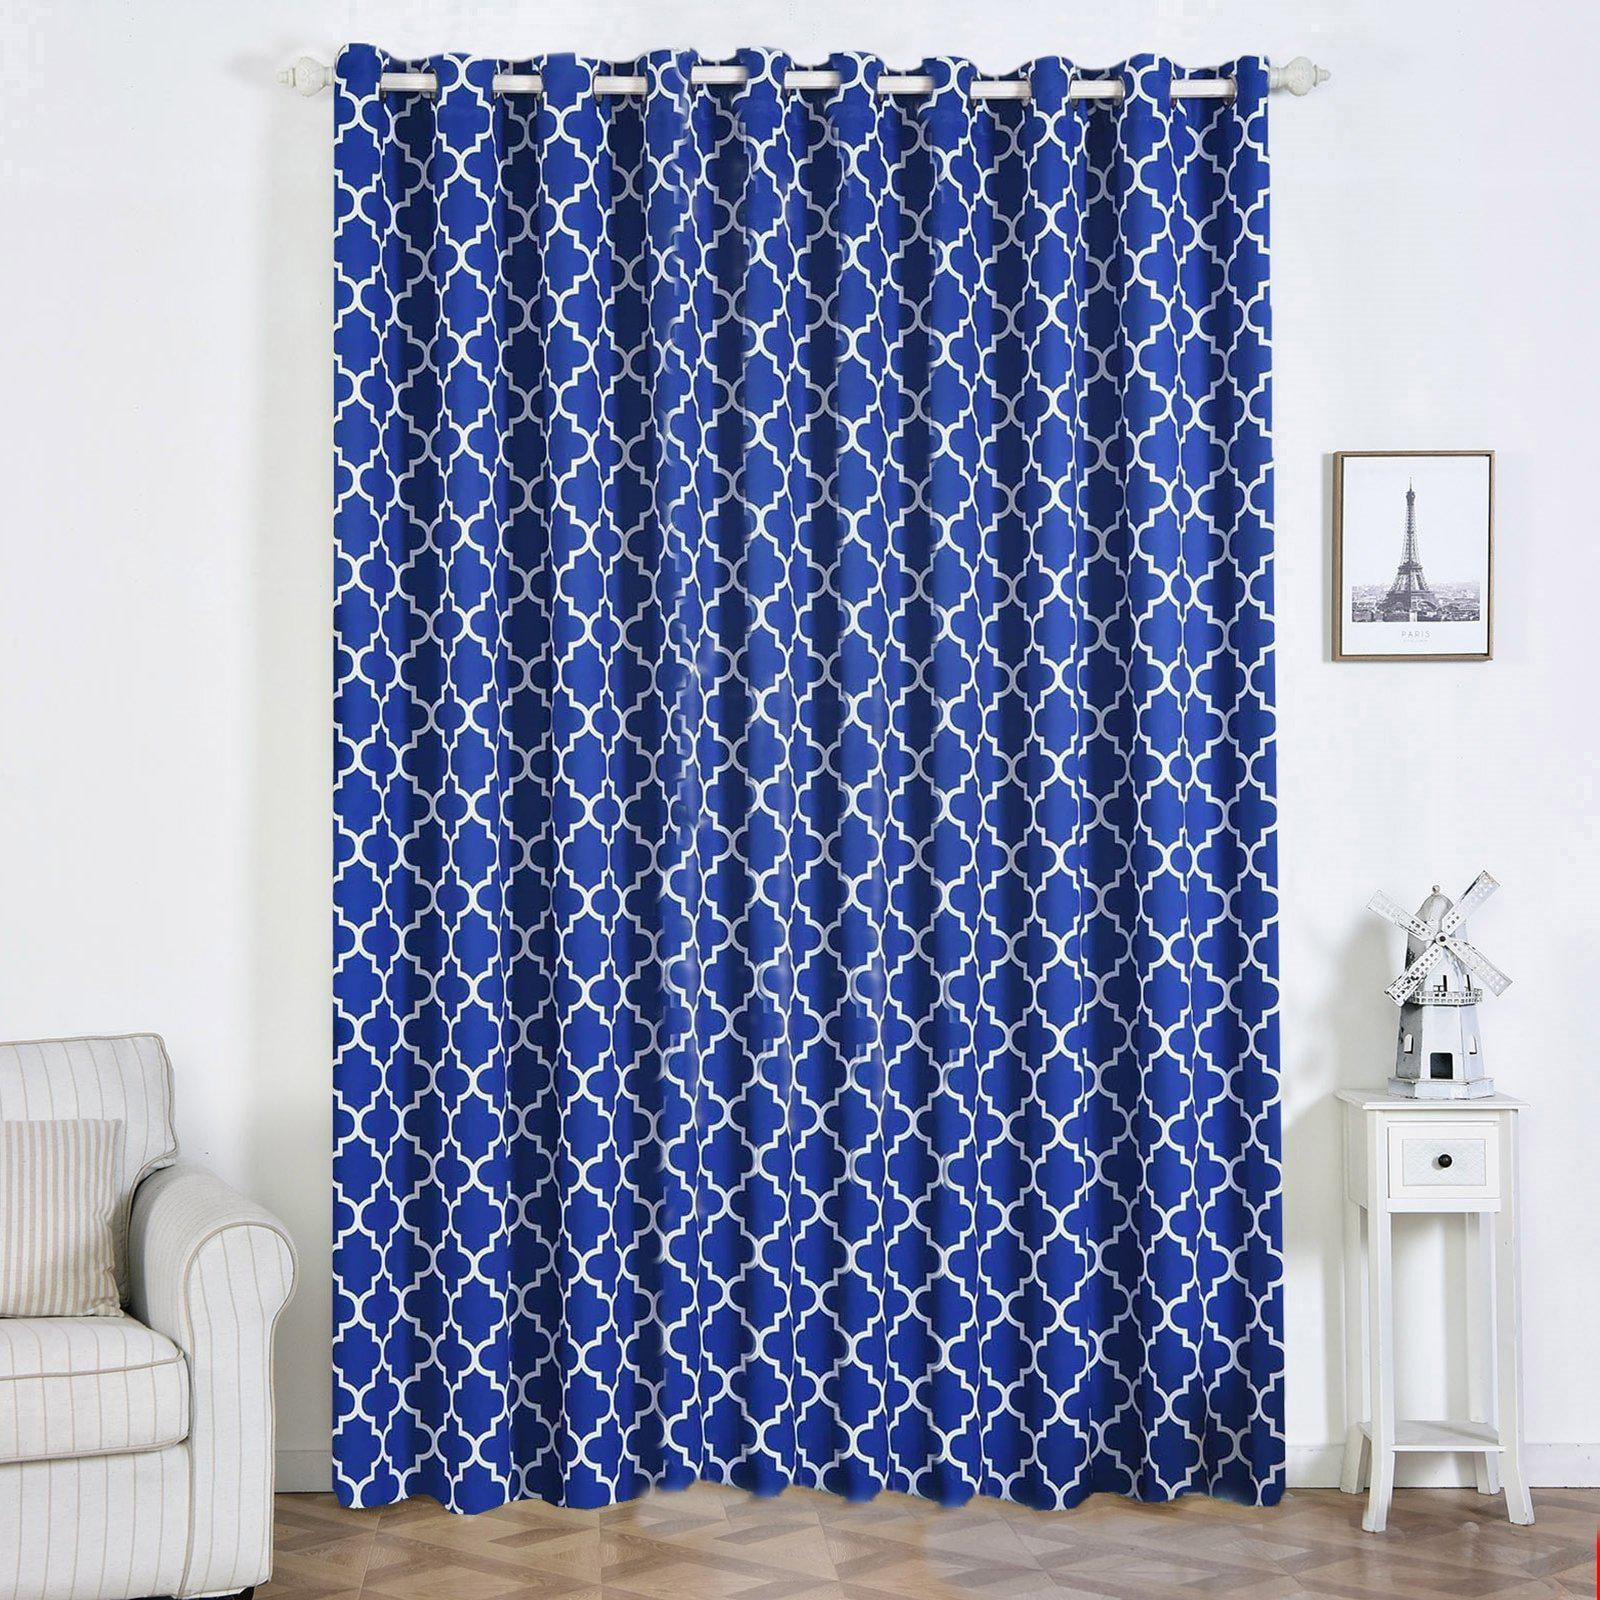 3D Soccer Star Blockout Photo Curtain Printing Curtains Drapes Fabric Window CA 